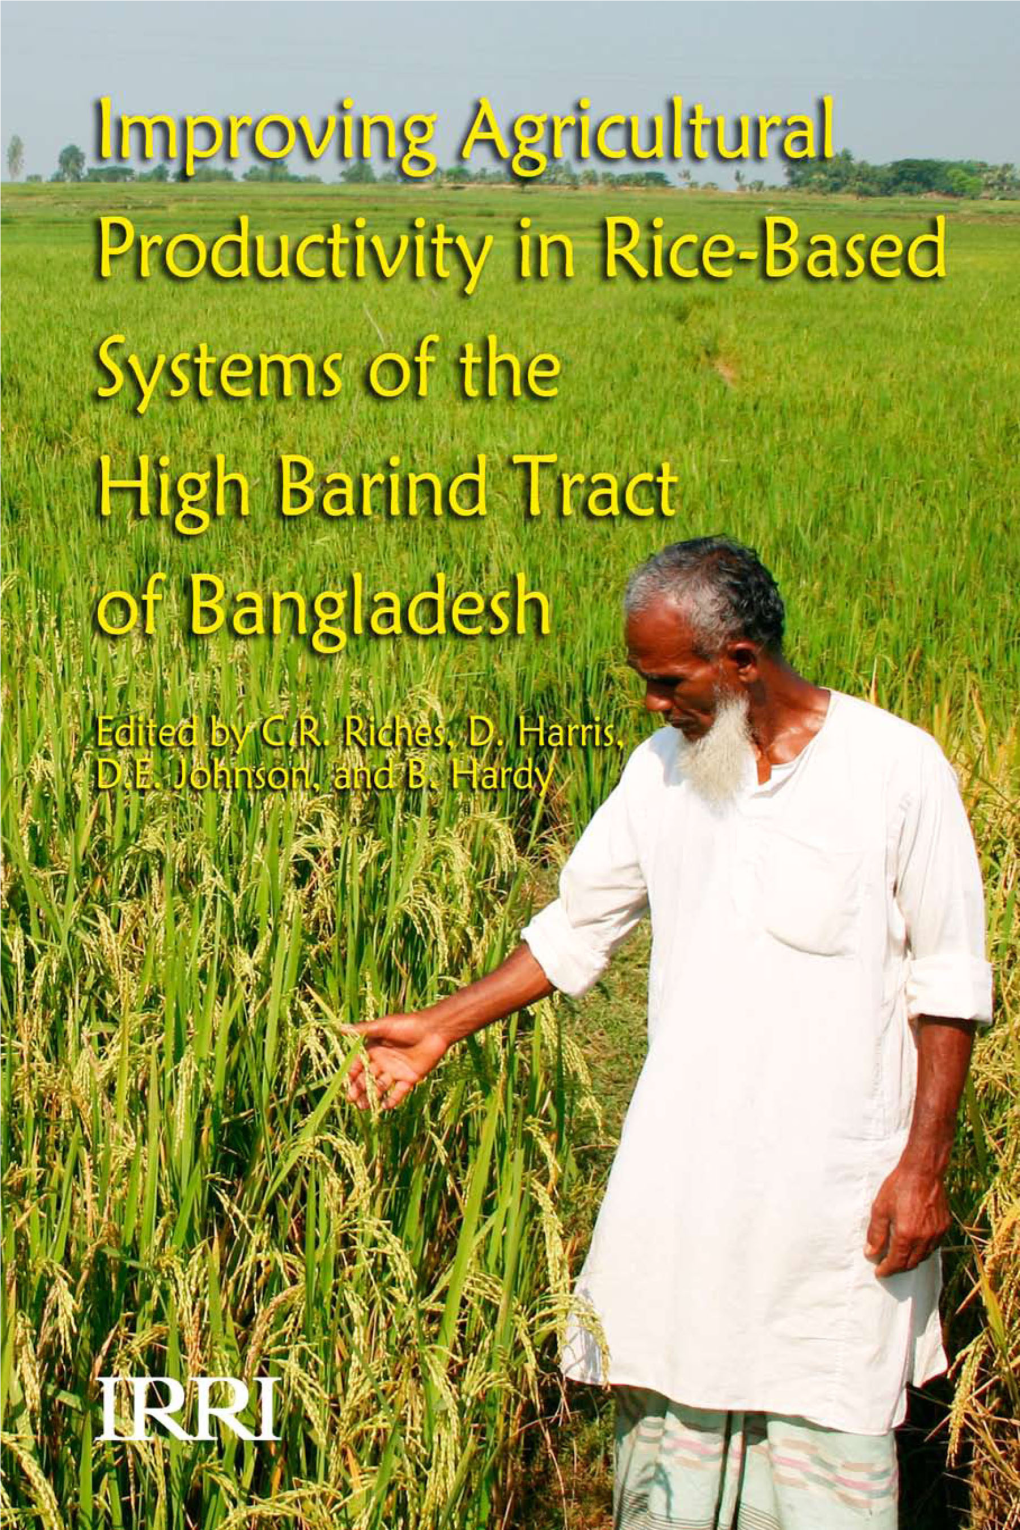 Improving Agricultural Productivity in Rice-Based Systems of the High Barind Tract of Bangladesh